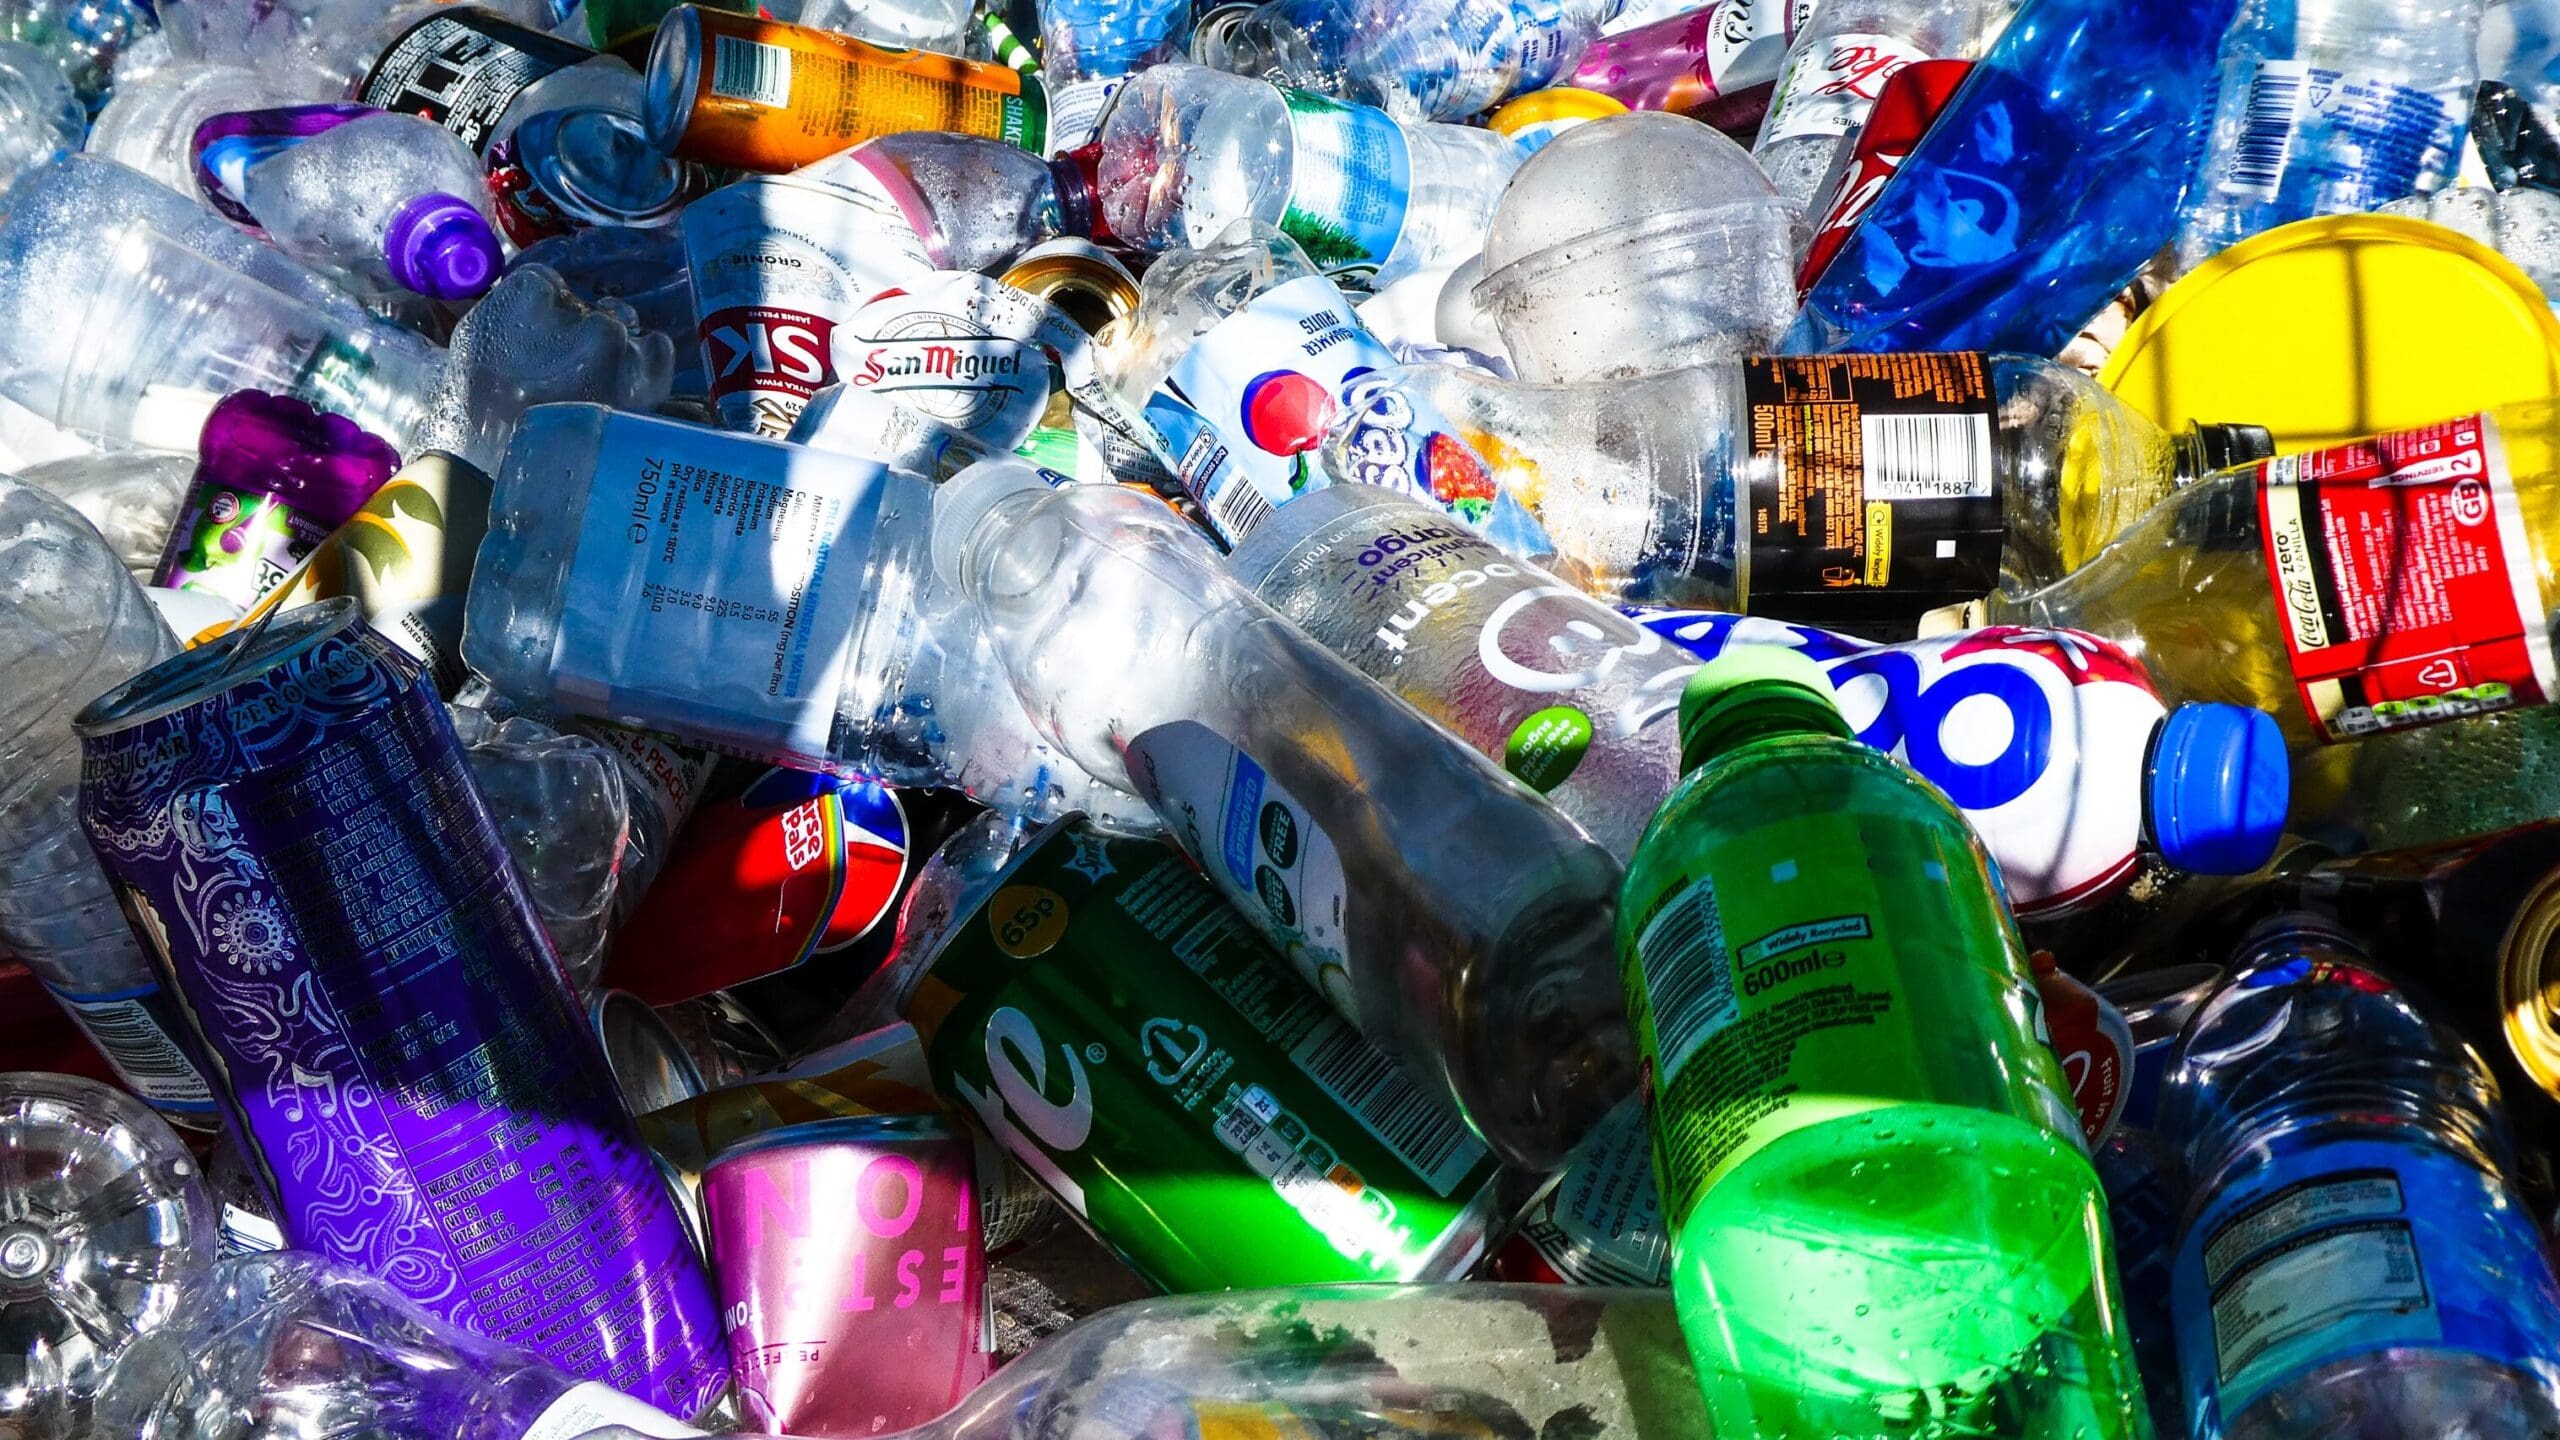 Mixture of cans and plastic bottles in recycling